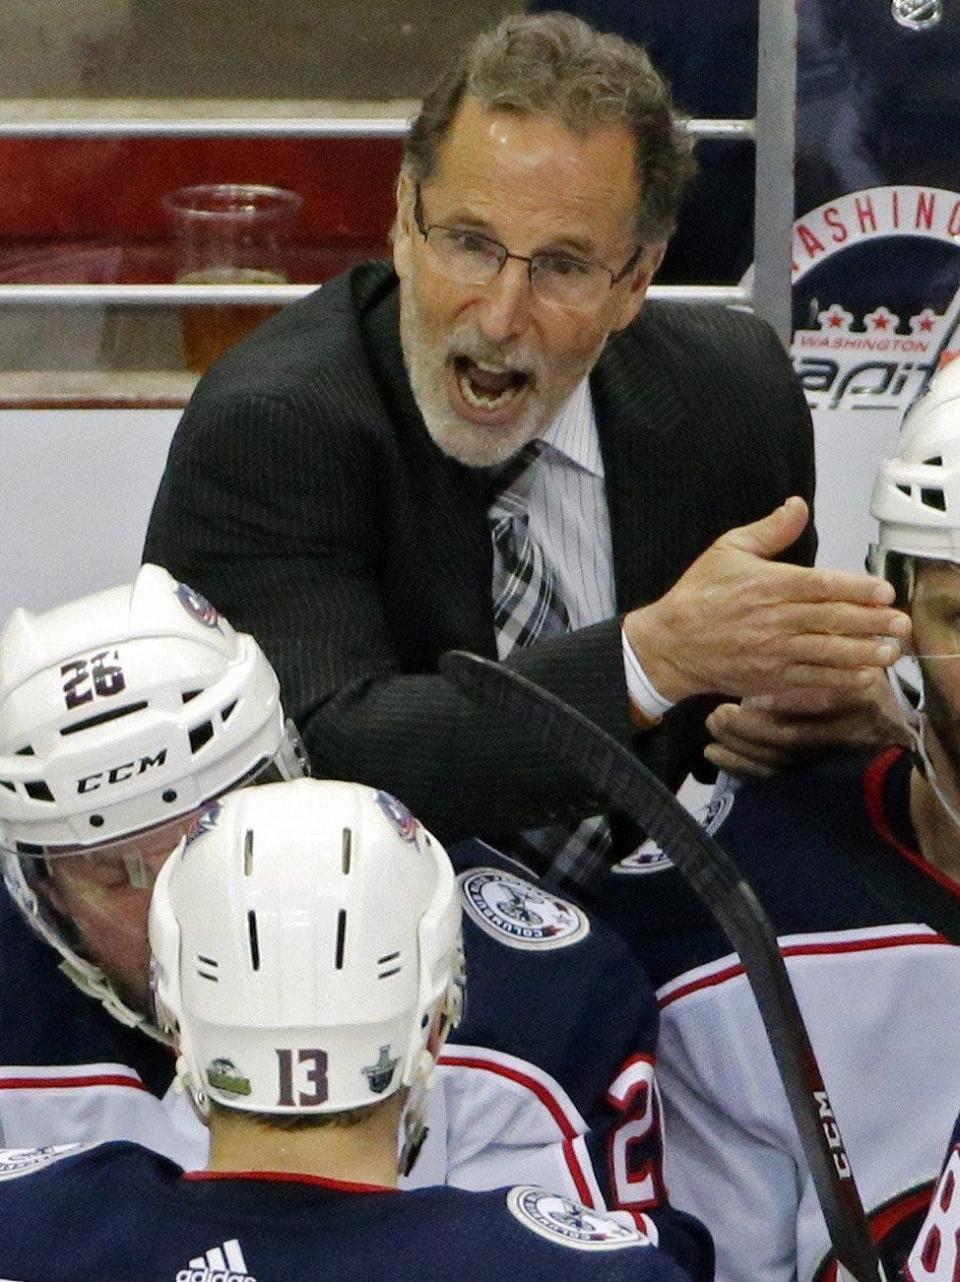 Columbus Blue Jackets coach John Tortorella talks to his team against Washington Capitals during the the 3rd period in Game 2 of the Stanley Cup Playoffs first-round series at Capital One Arena in Washington D.C. on April 15, 2018.  [Kyle Robertson/Dispatch] 